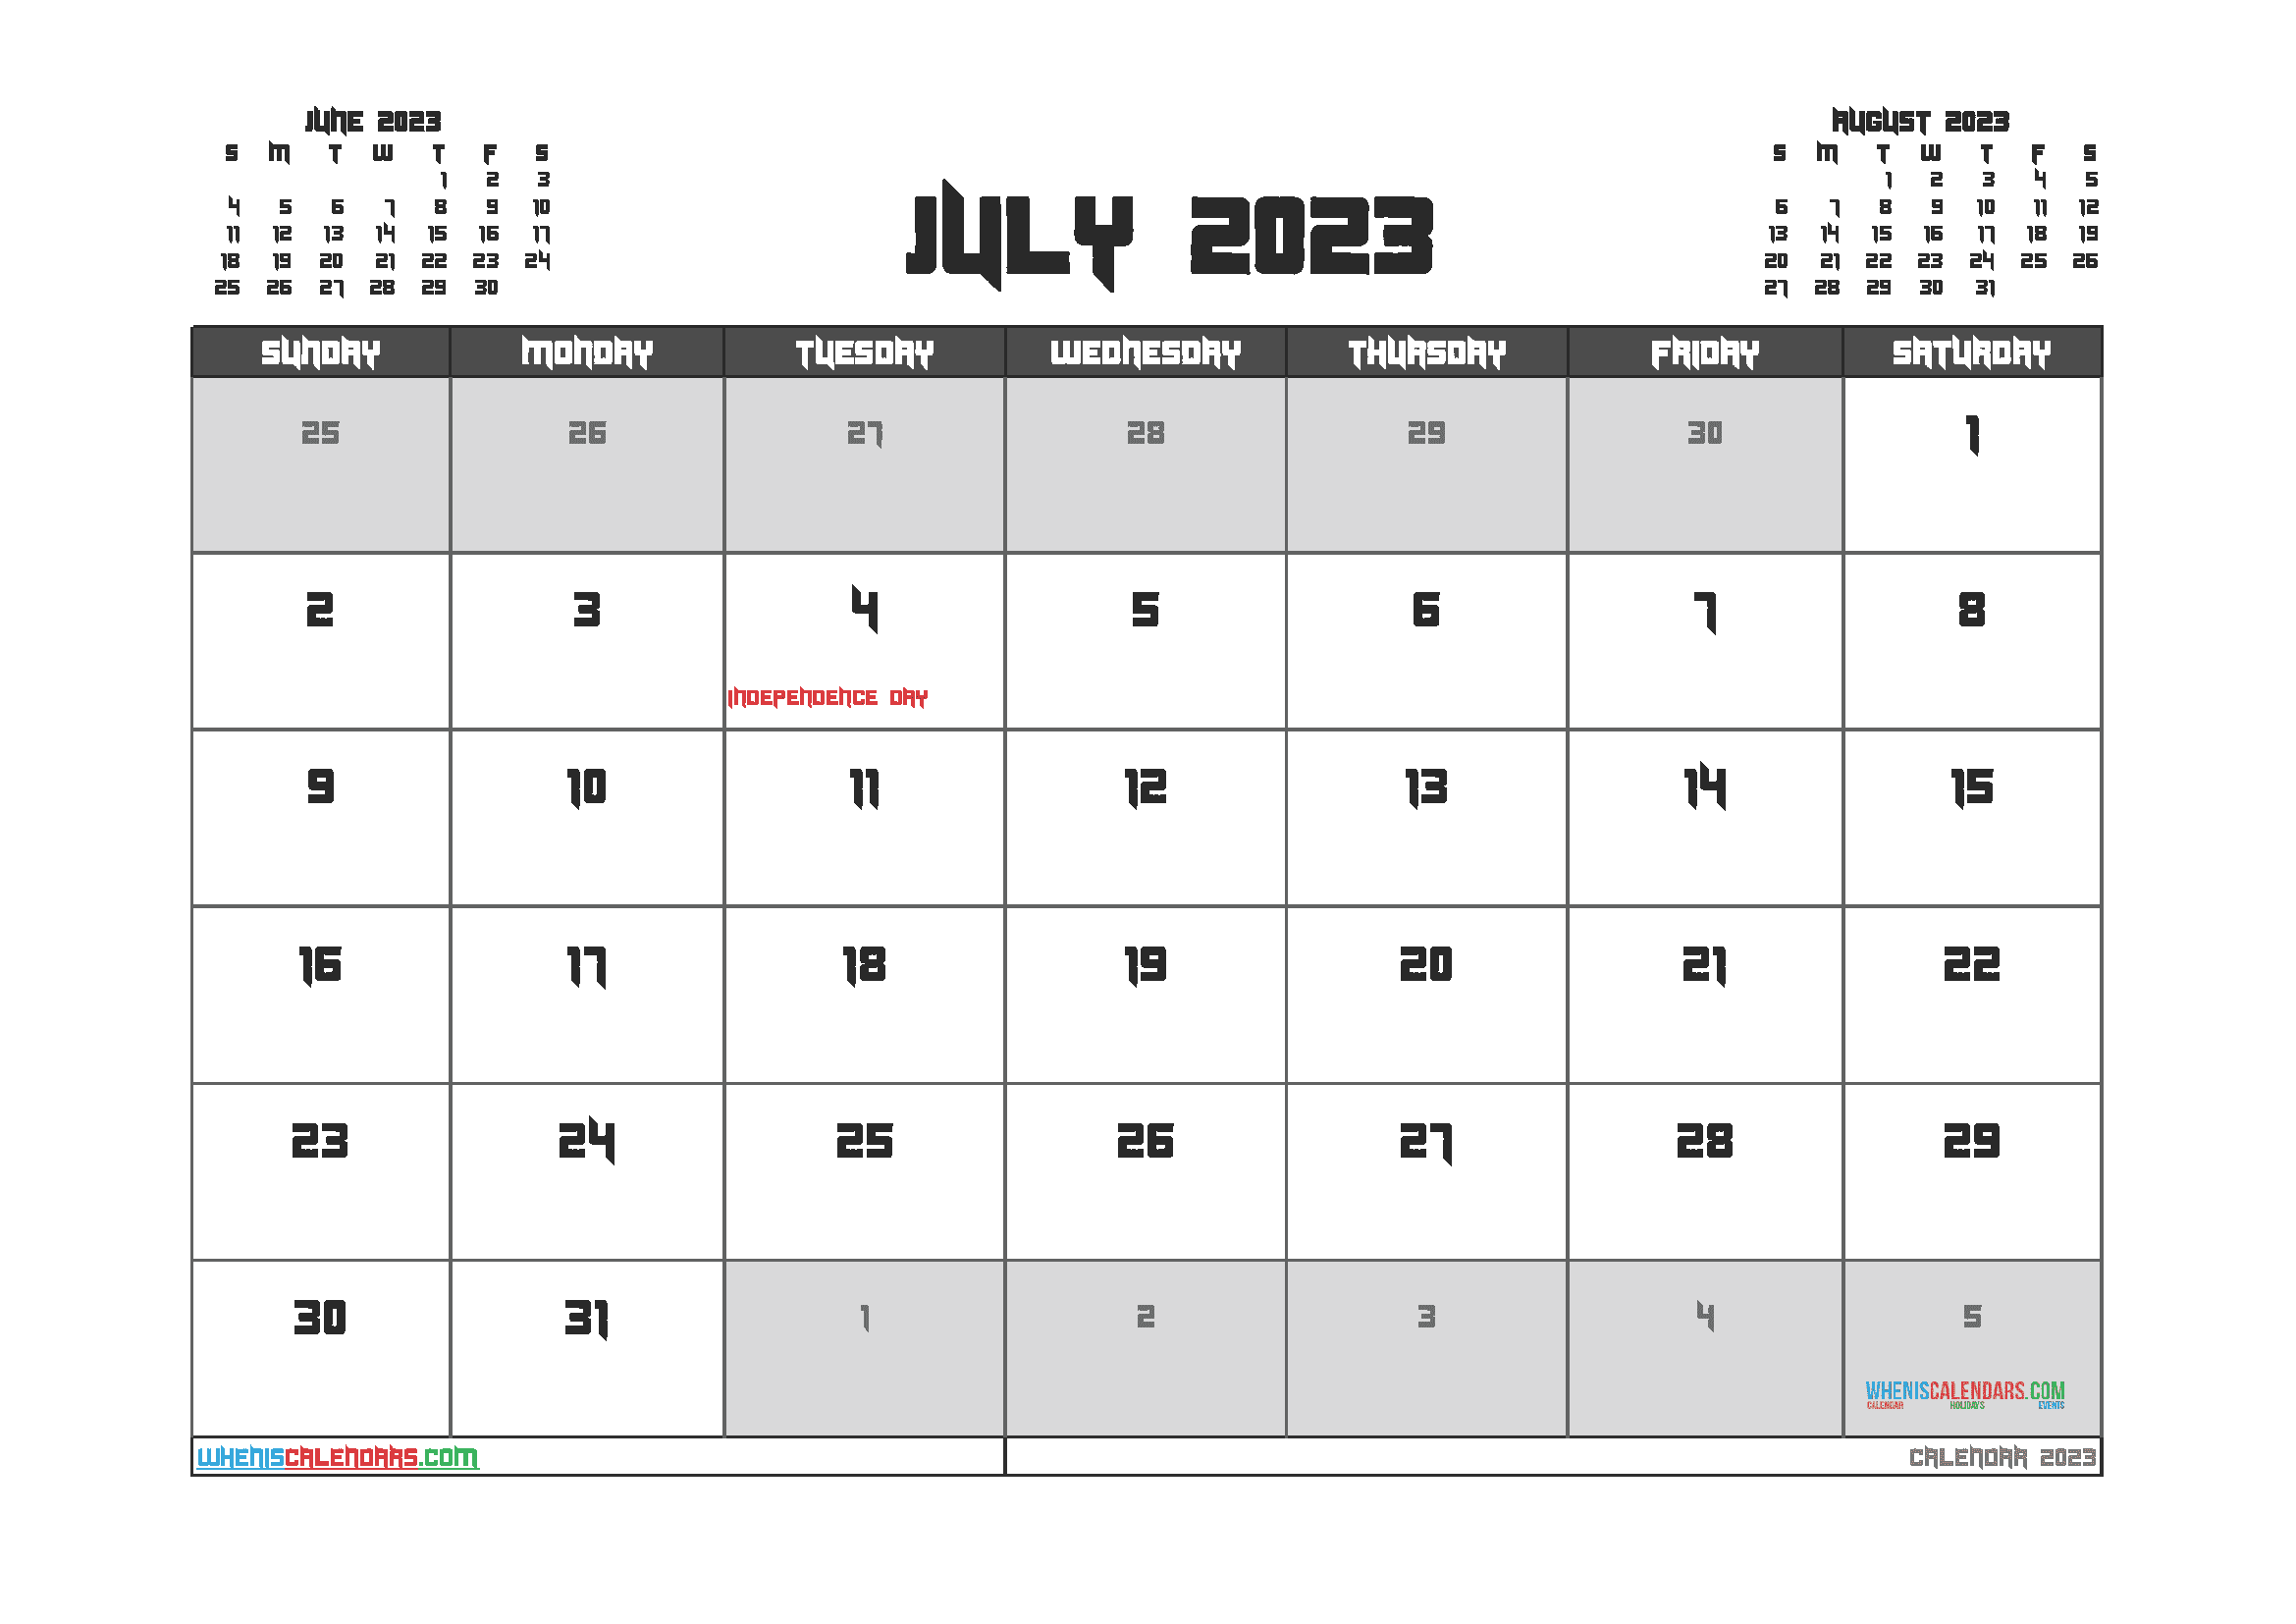 July 2023 Calendar with Holidays Free Printable PDF in Landscape